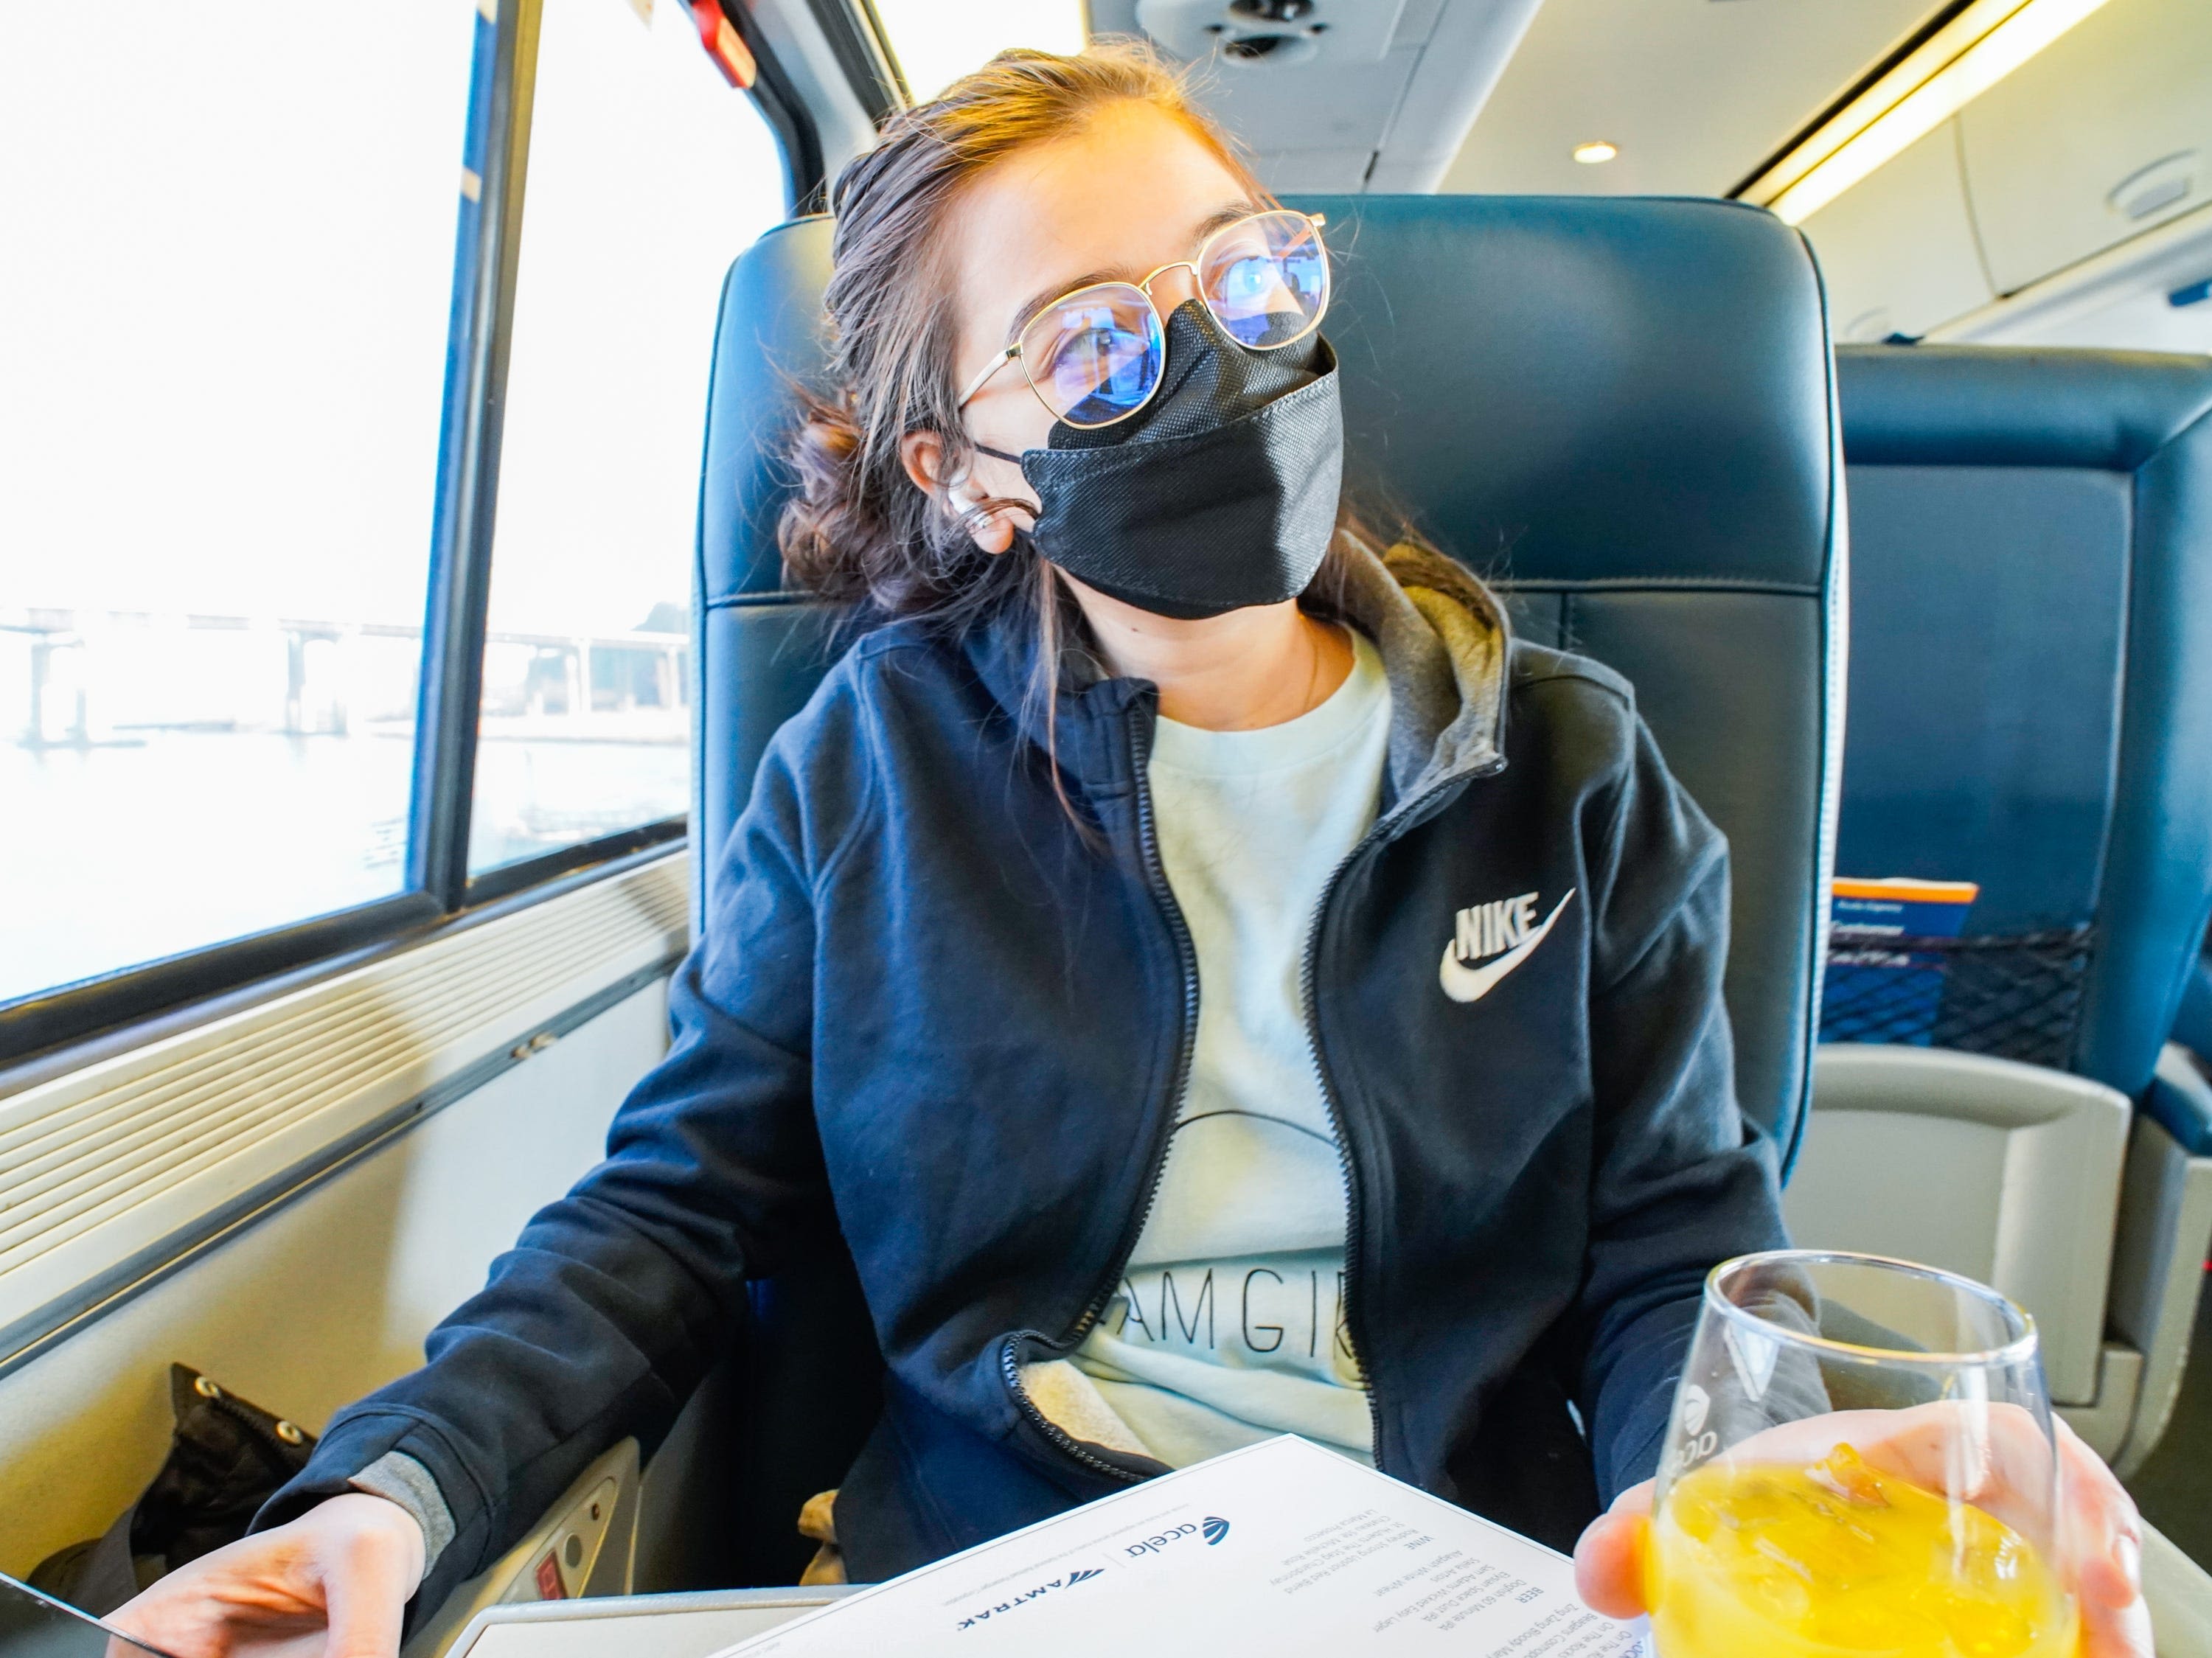 I upgraded to first class on Amtrak. Here are 12 things that surprised me about the trip.